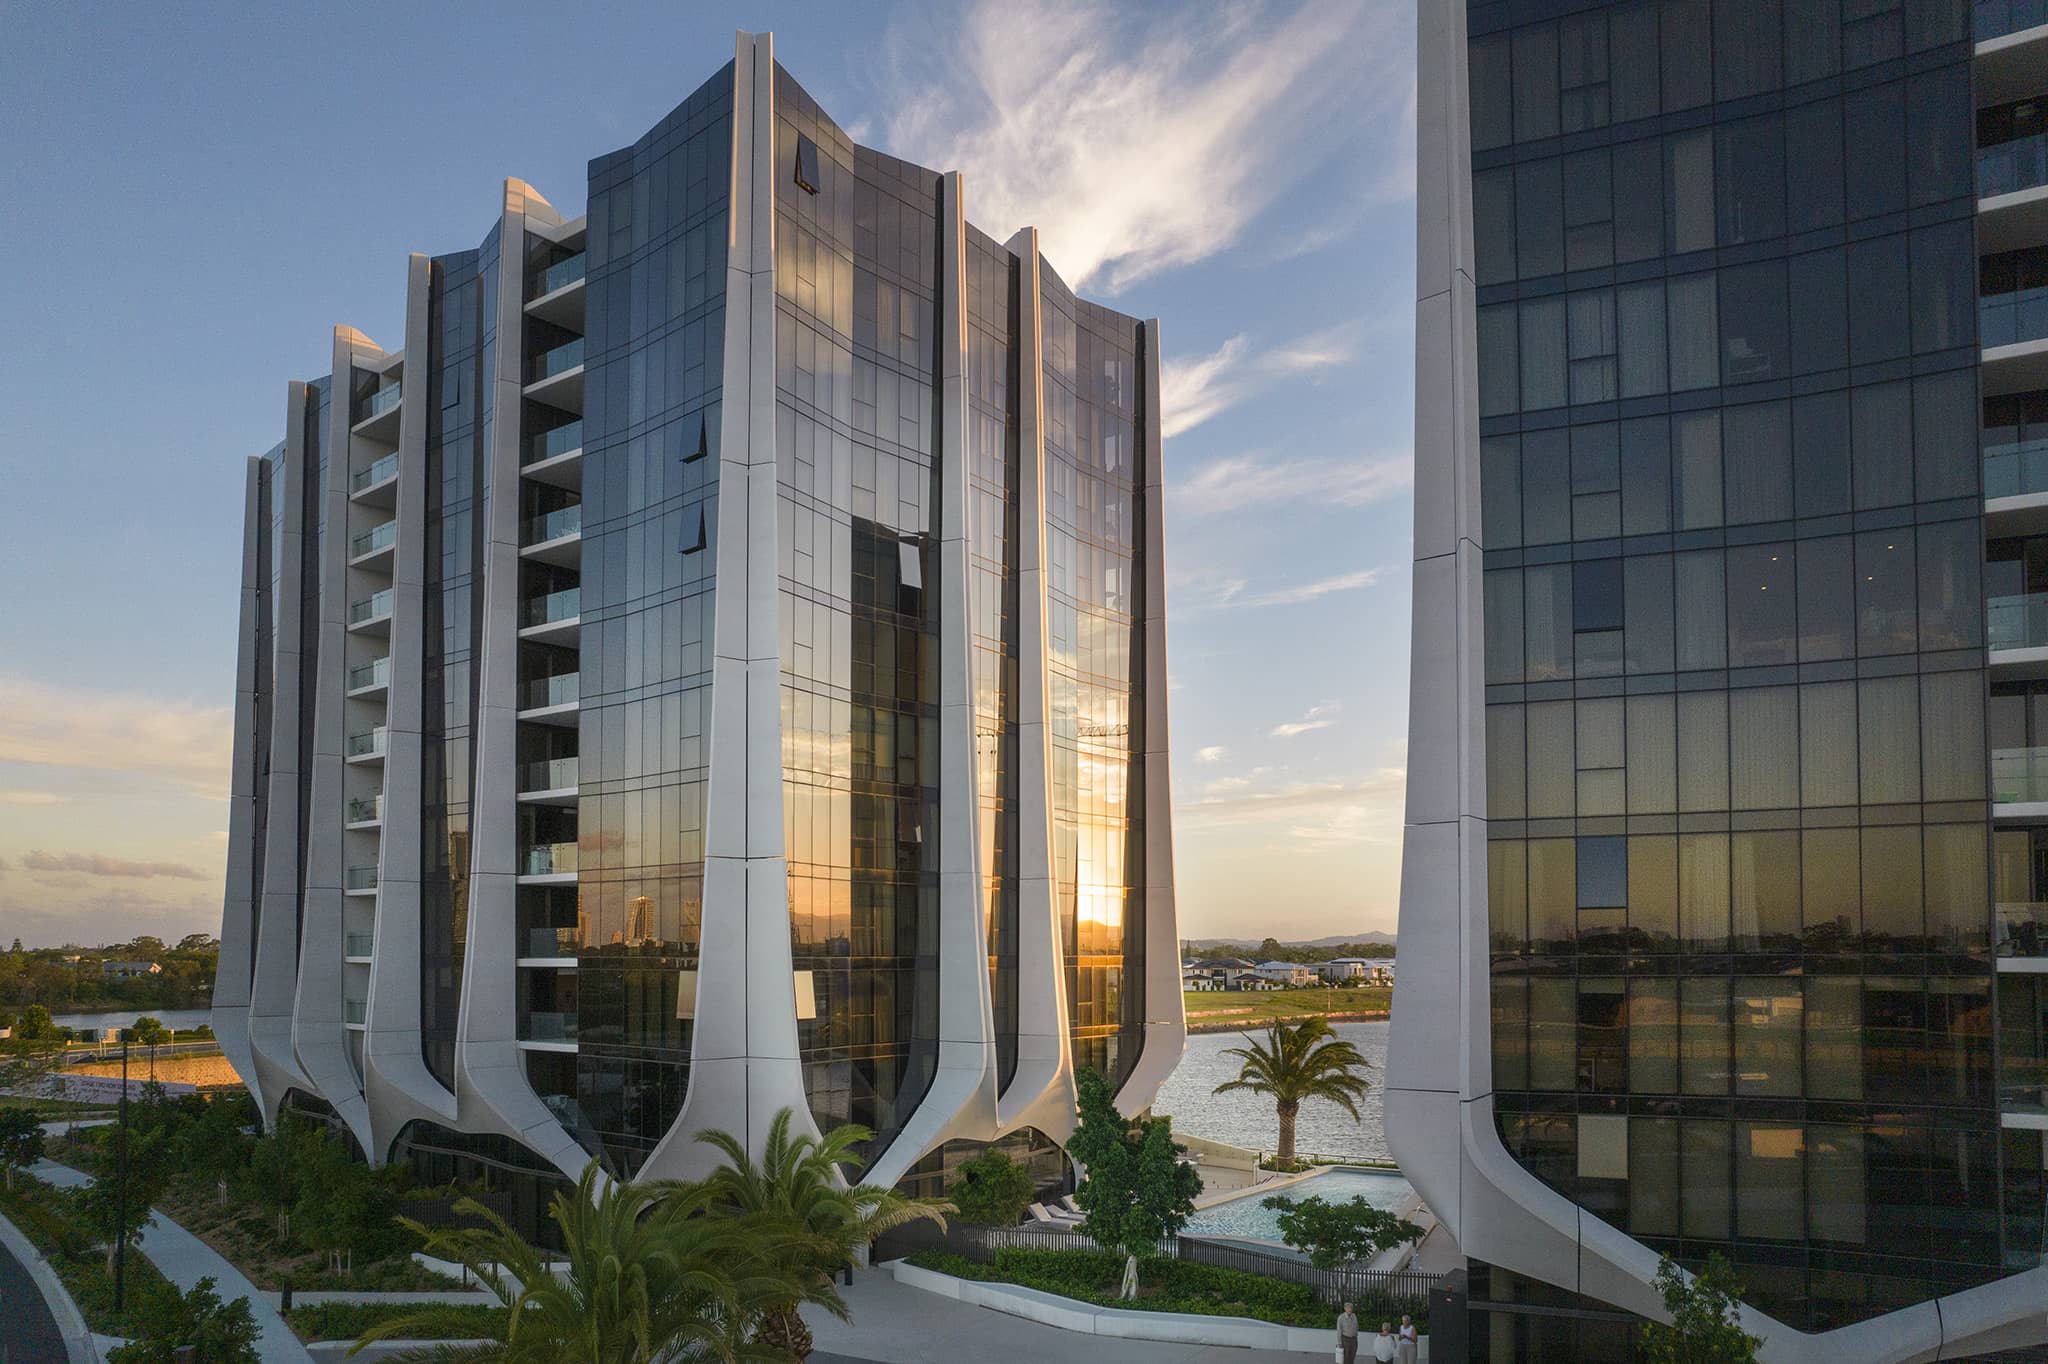 Exterior photography of residential glass façade towers with vertical elements; sunset view.